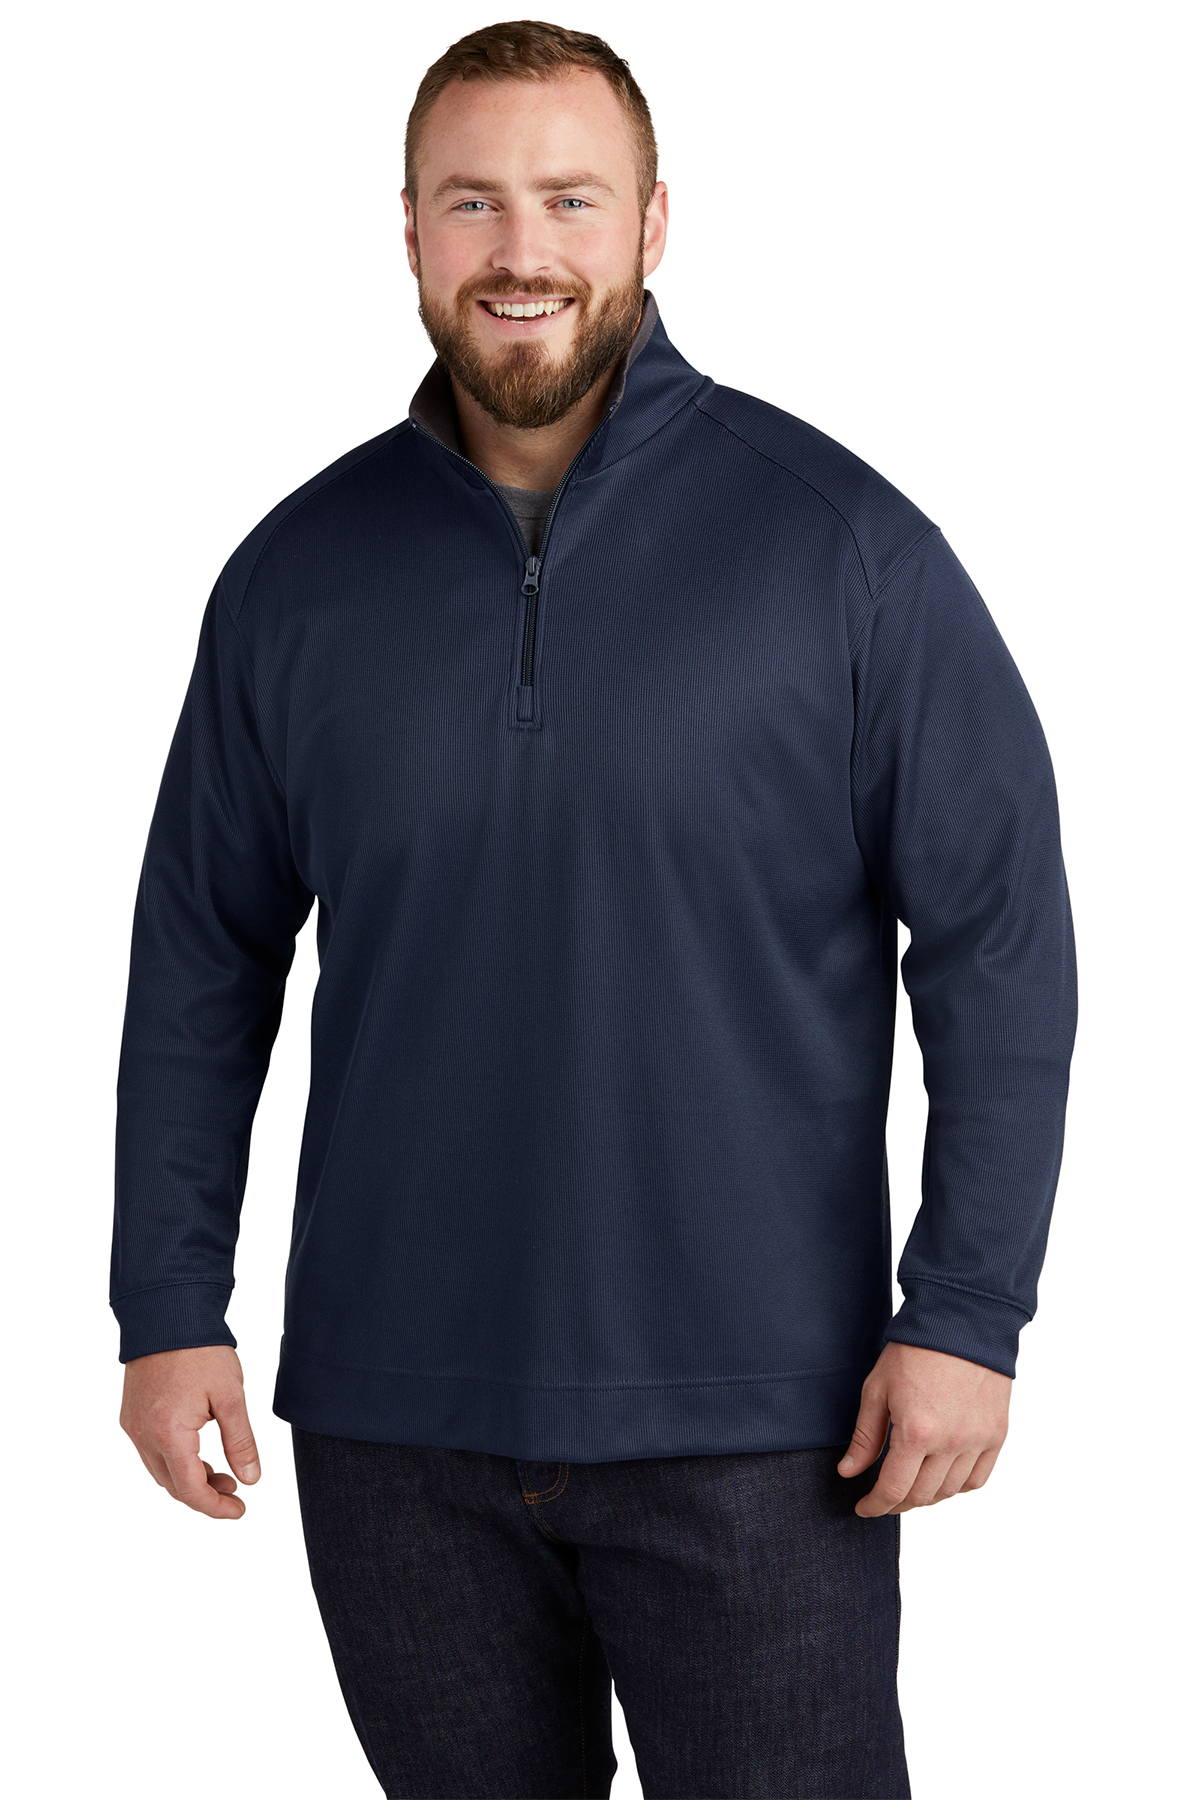 Port Authority Vertical Texture 1/4-Zip Pullover, Product